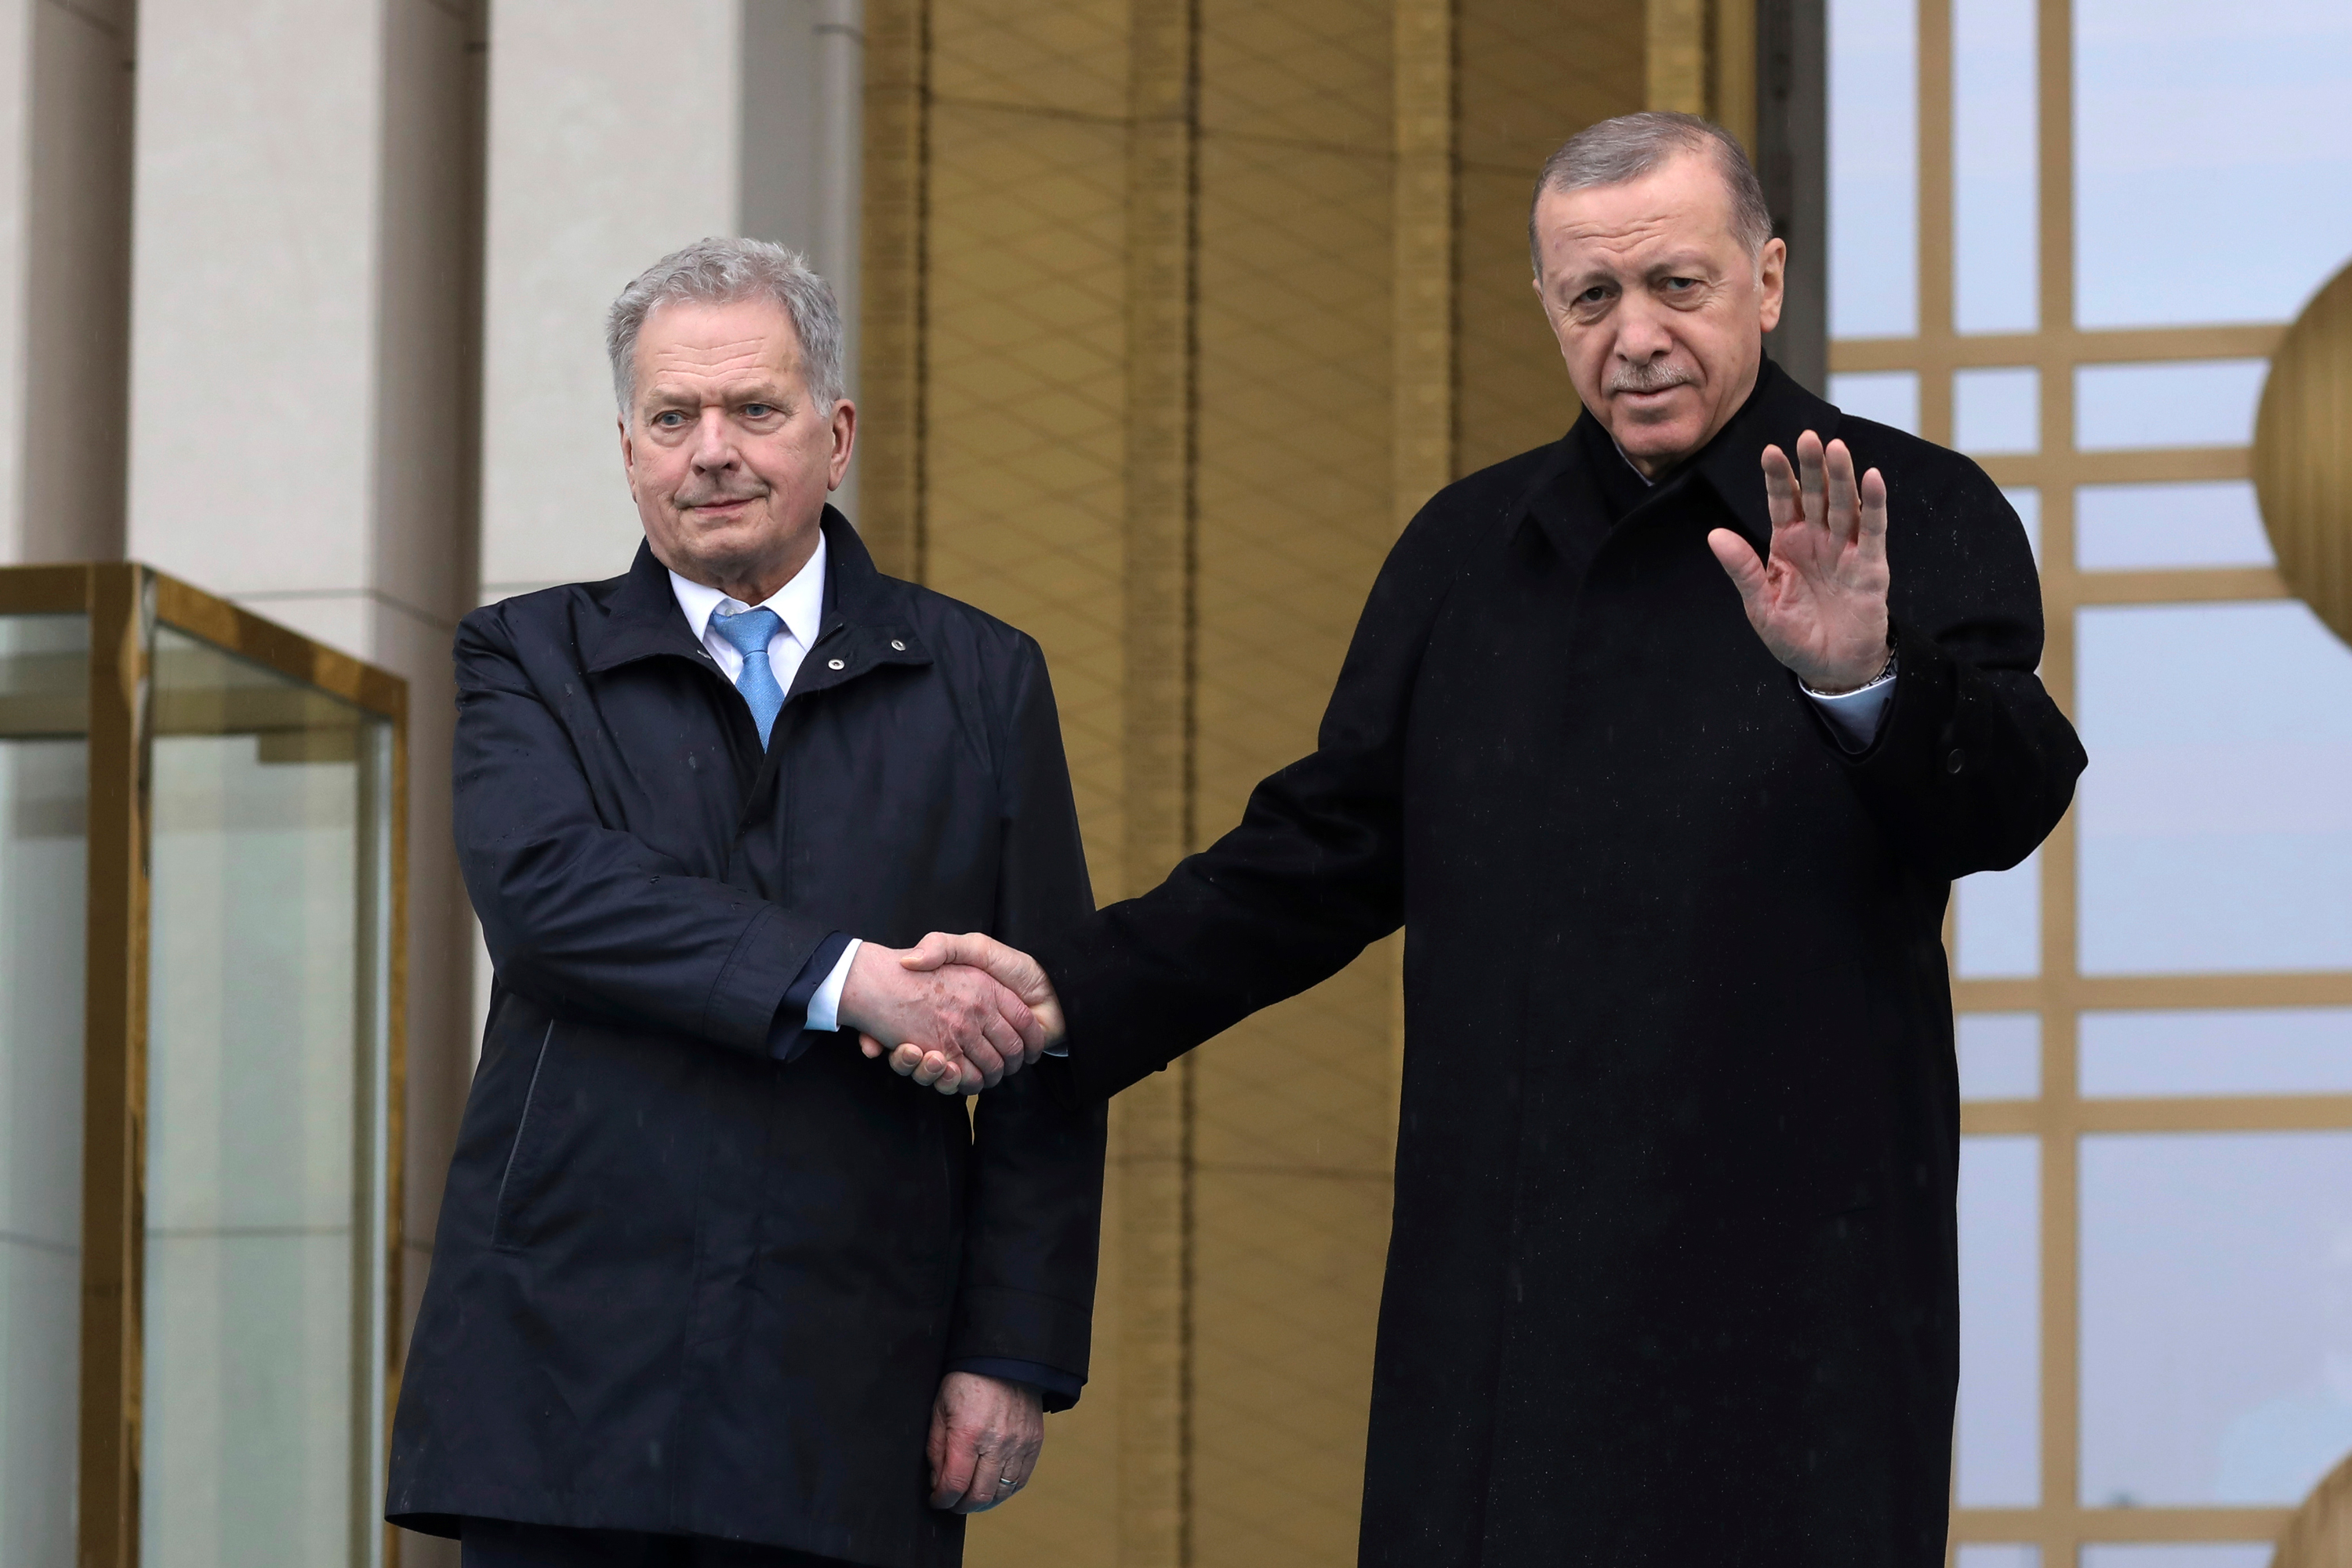 Turkish President Recep Tayyip Erdogan, right, and Finland's President Sauli Niinistö shake hands during a welcome ceremony at the presidential palace in Ankara, Turkey, on March 17.